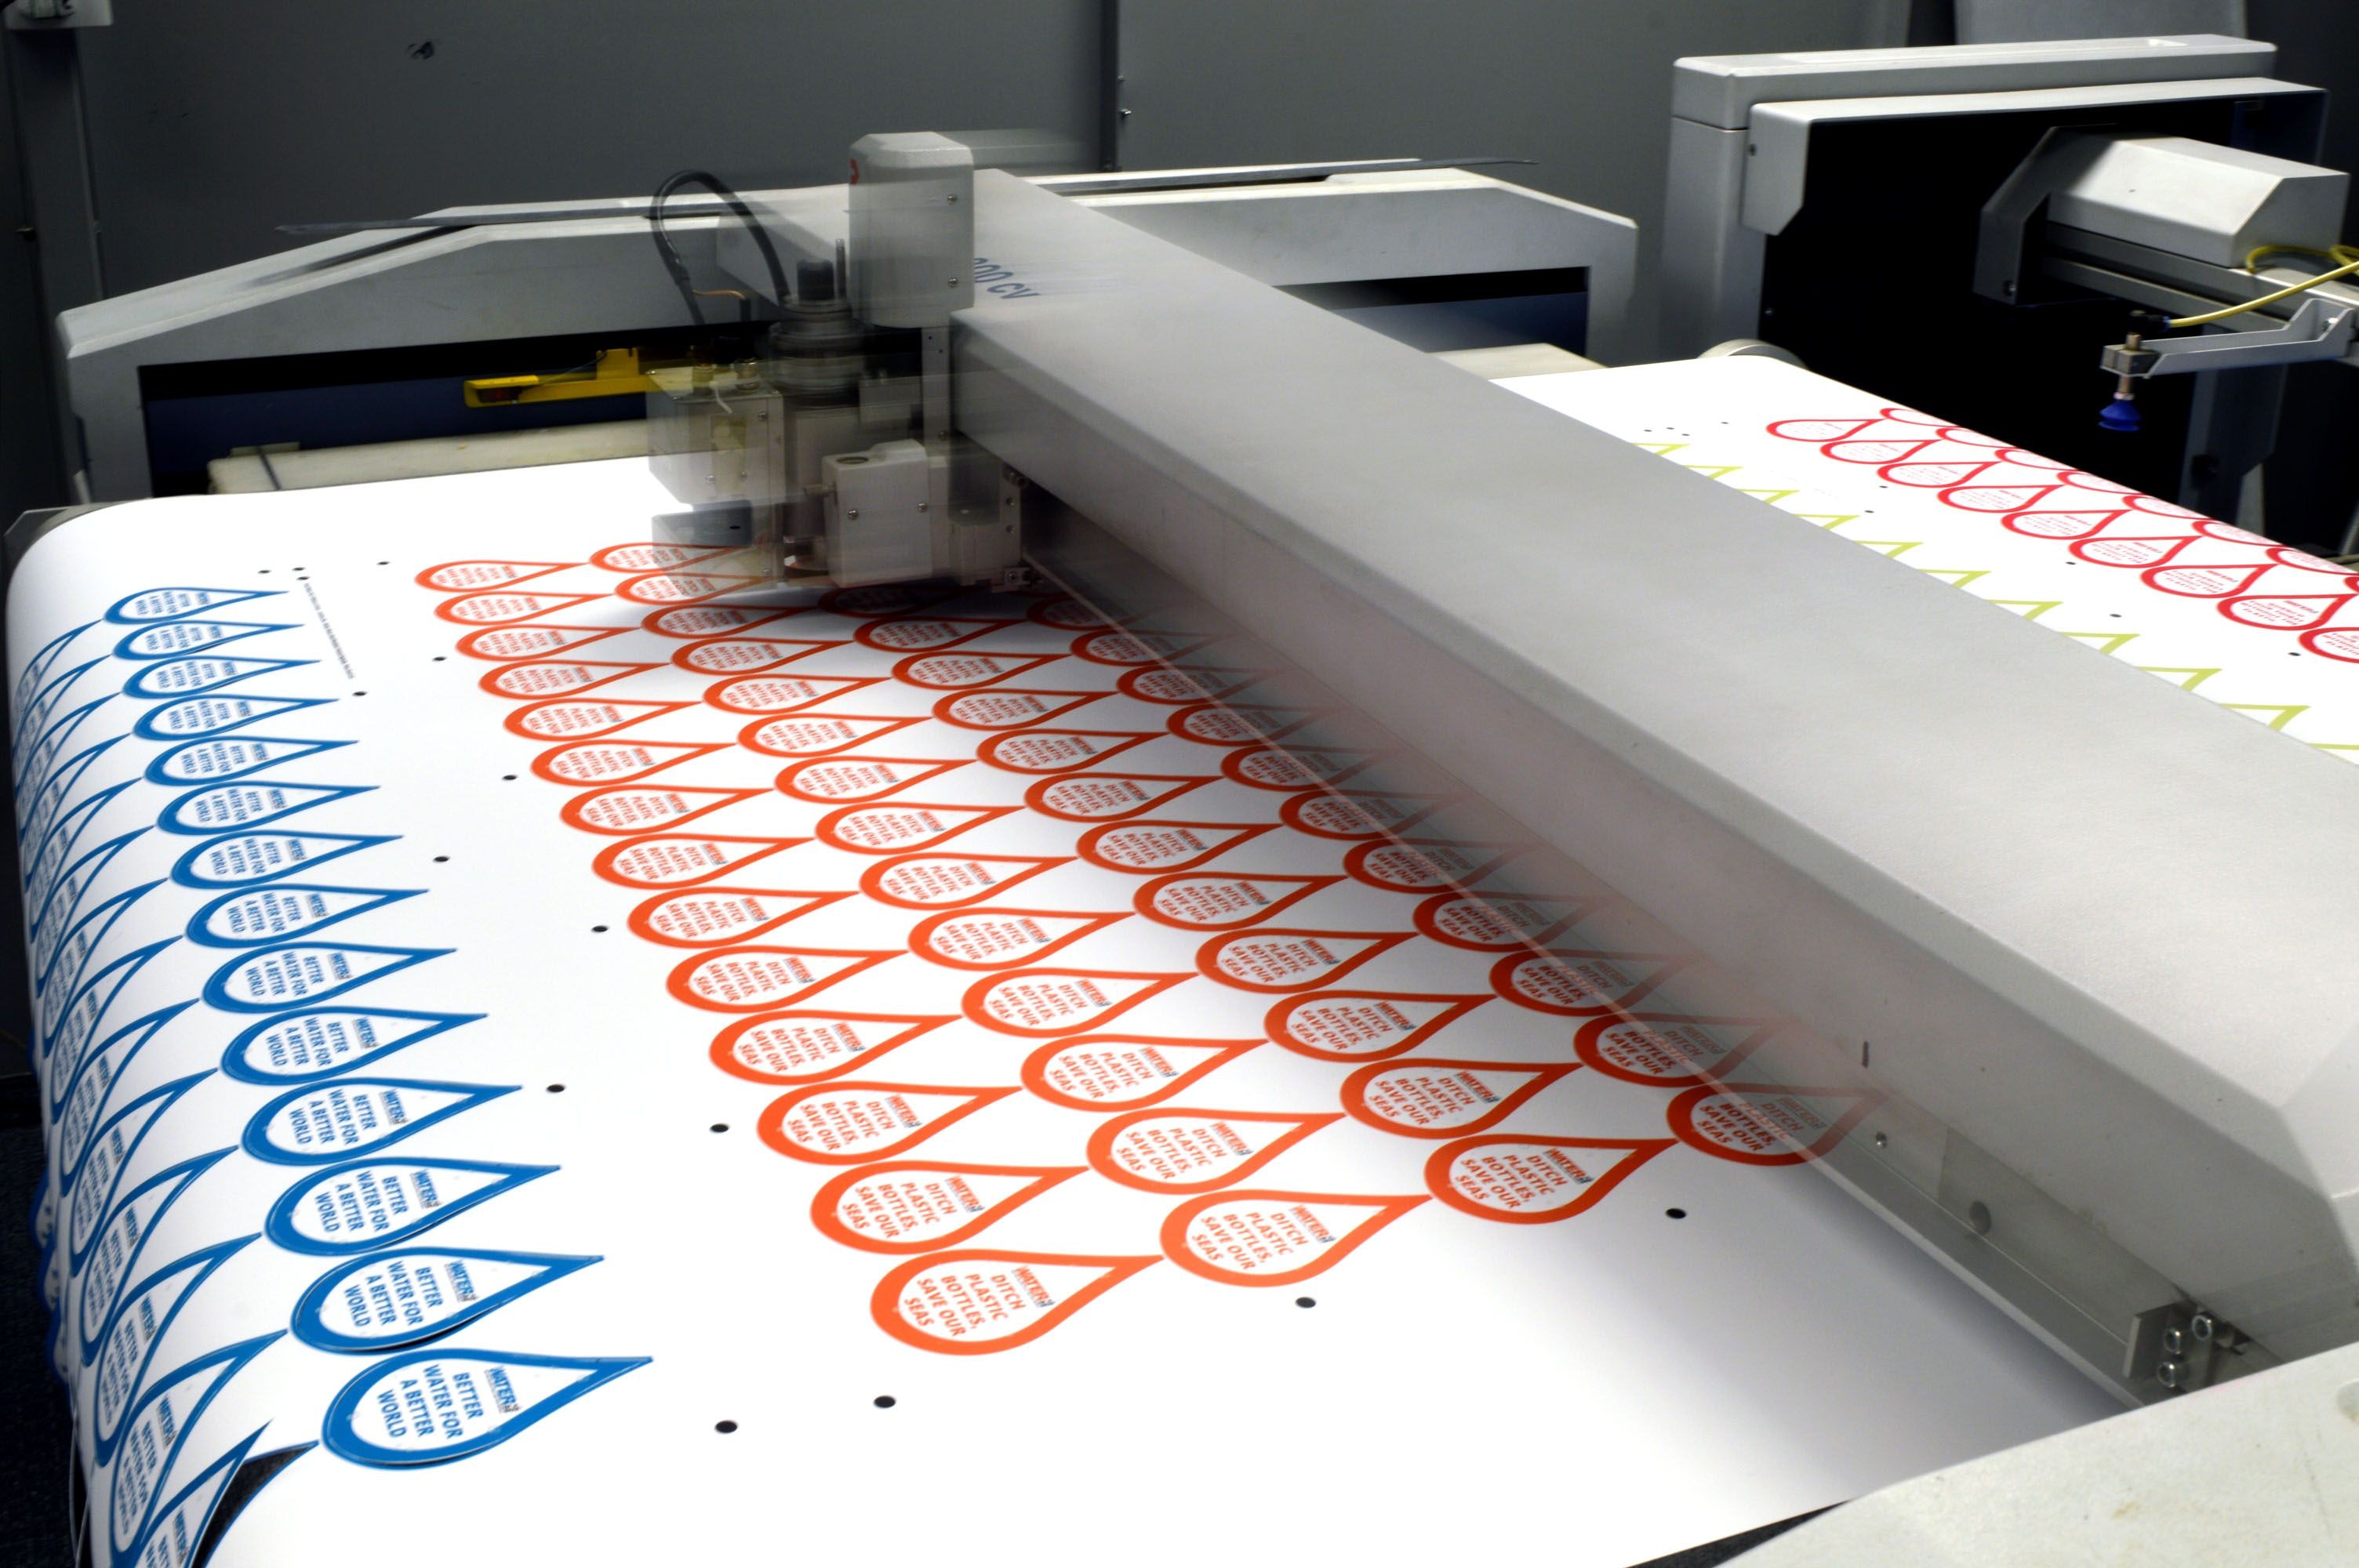 Custom stickers being printed on a flatbed cutter